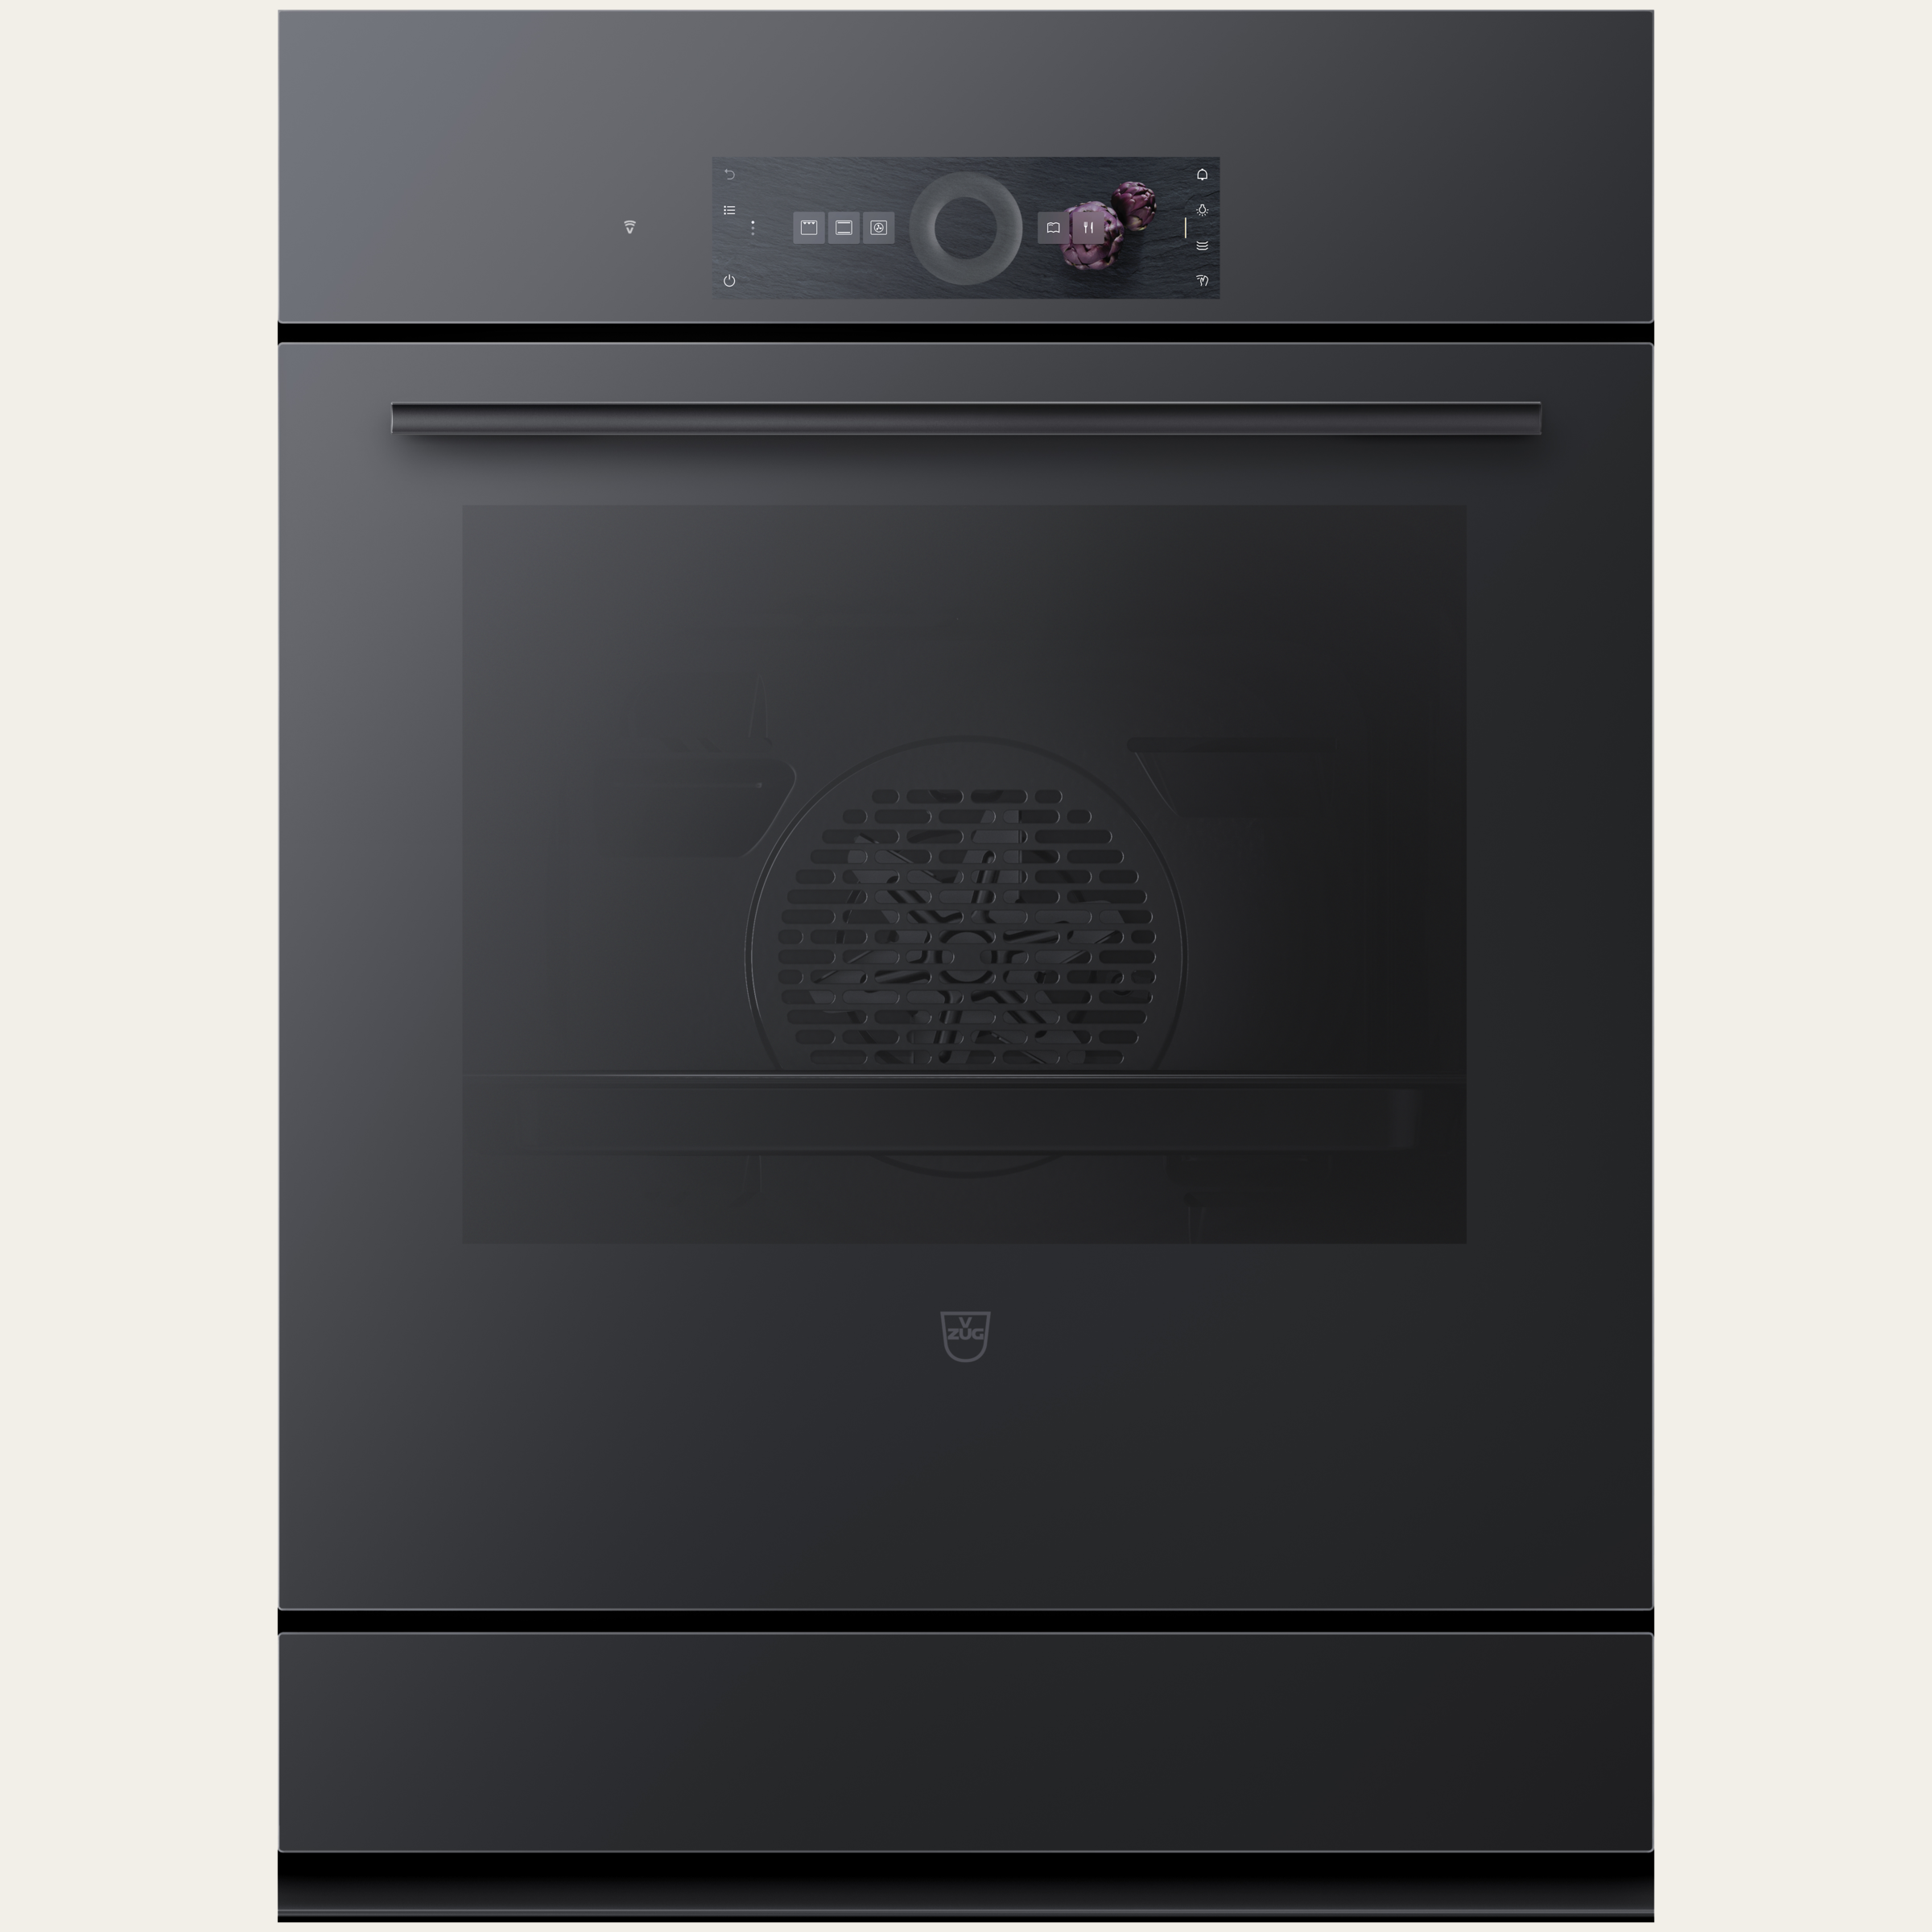 V-ZUG Oven Combair V4000 7UPC, Standard width: 55 cm, Standard height: 76.2 cm, Black mirror glass, Installation in floor unit, Touchscreen with CircleSlider,V-ZUG-Home, Heatable appliance drawer, Pyrolytic self-cleaning